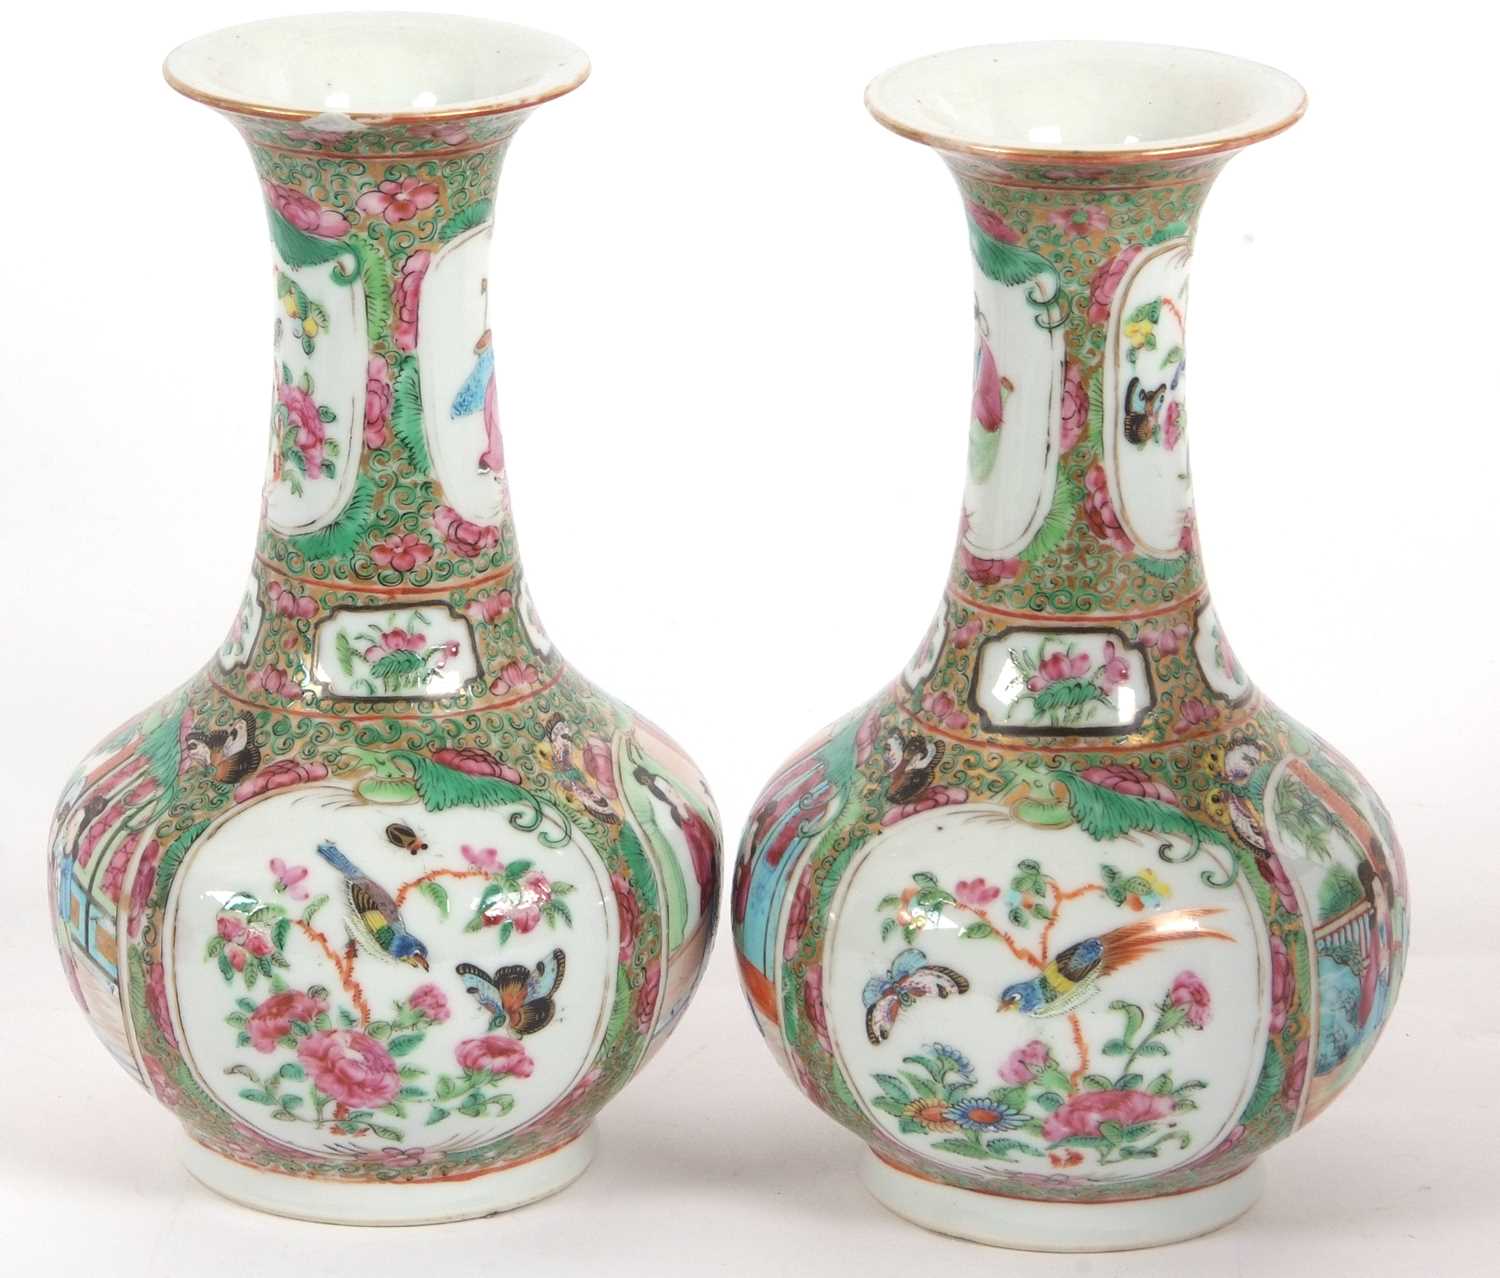 A pair of 19th Century Cantonese porcelain vases of baluster shape with typical designs of - Image 2 of 5